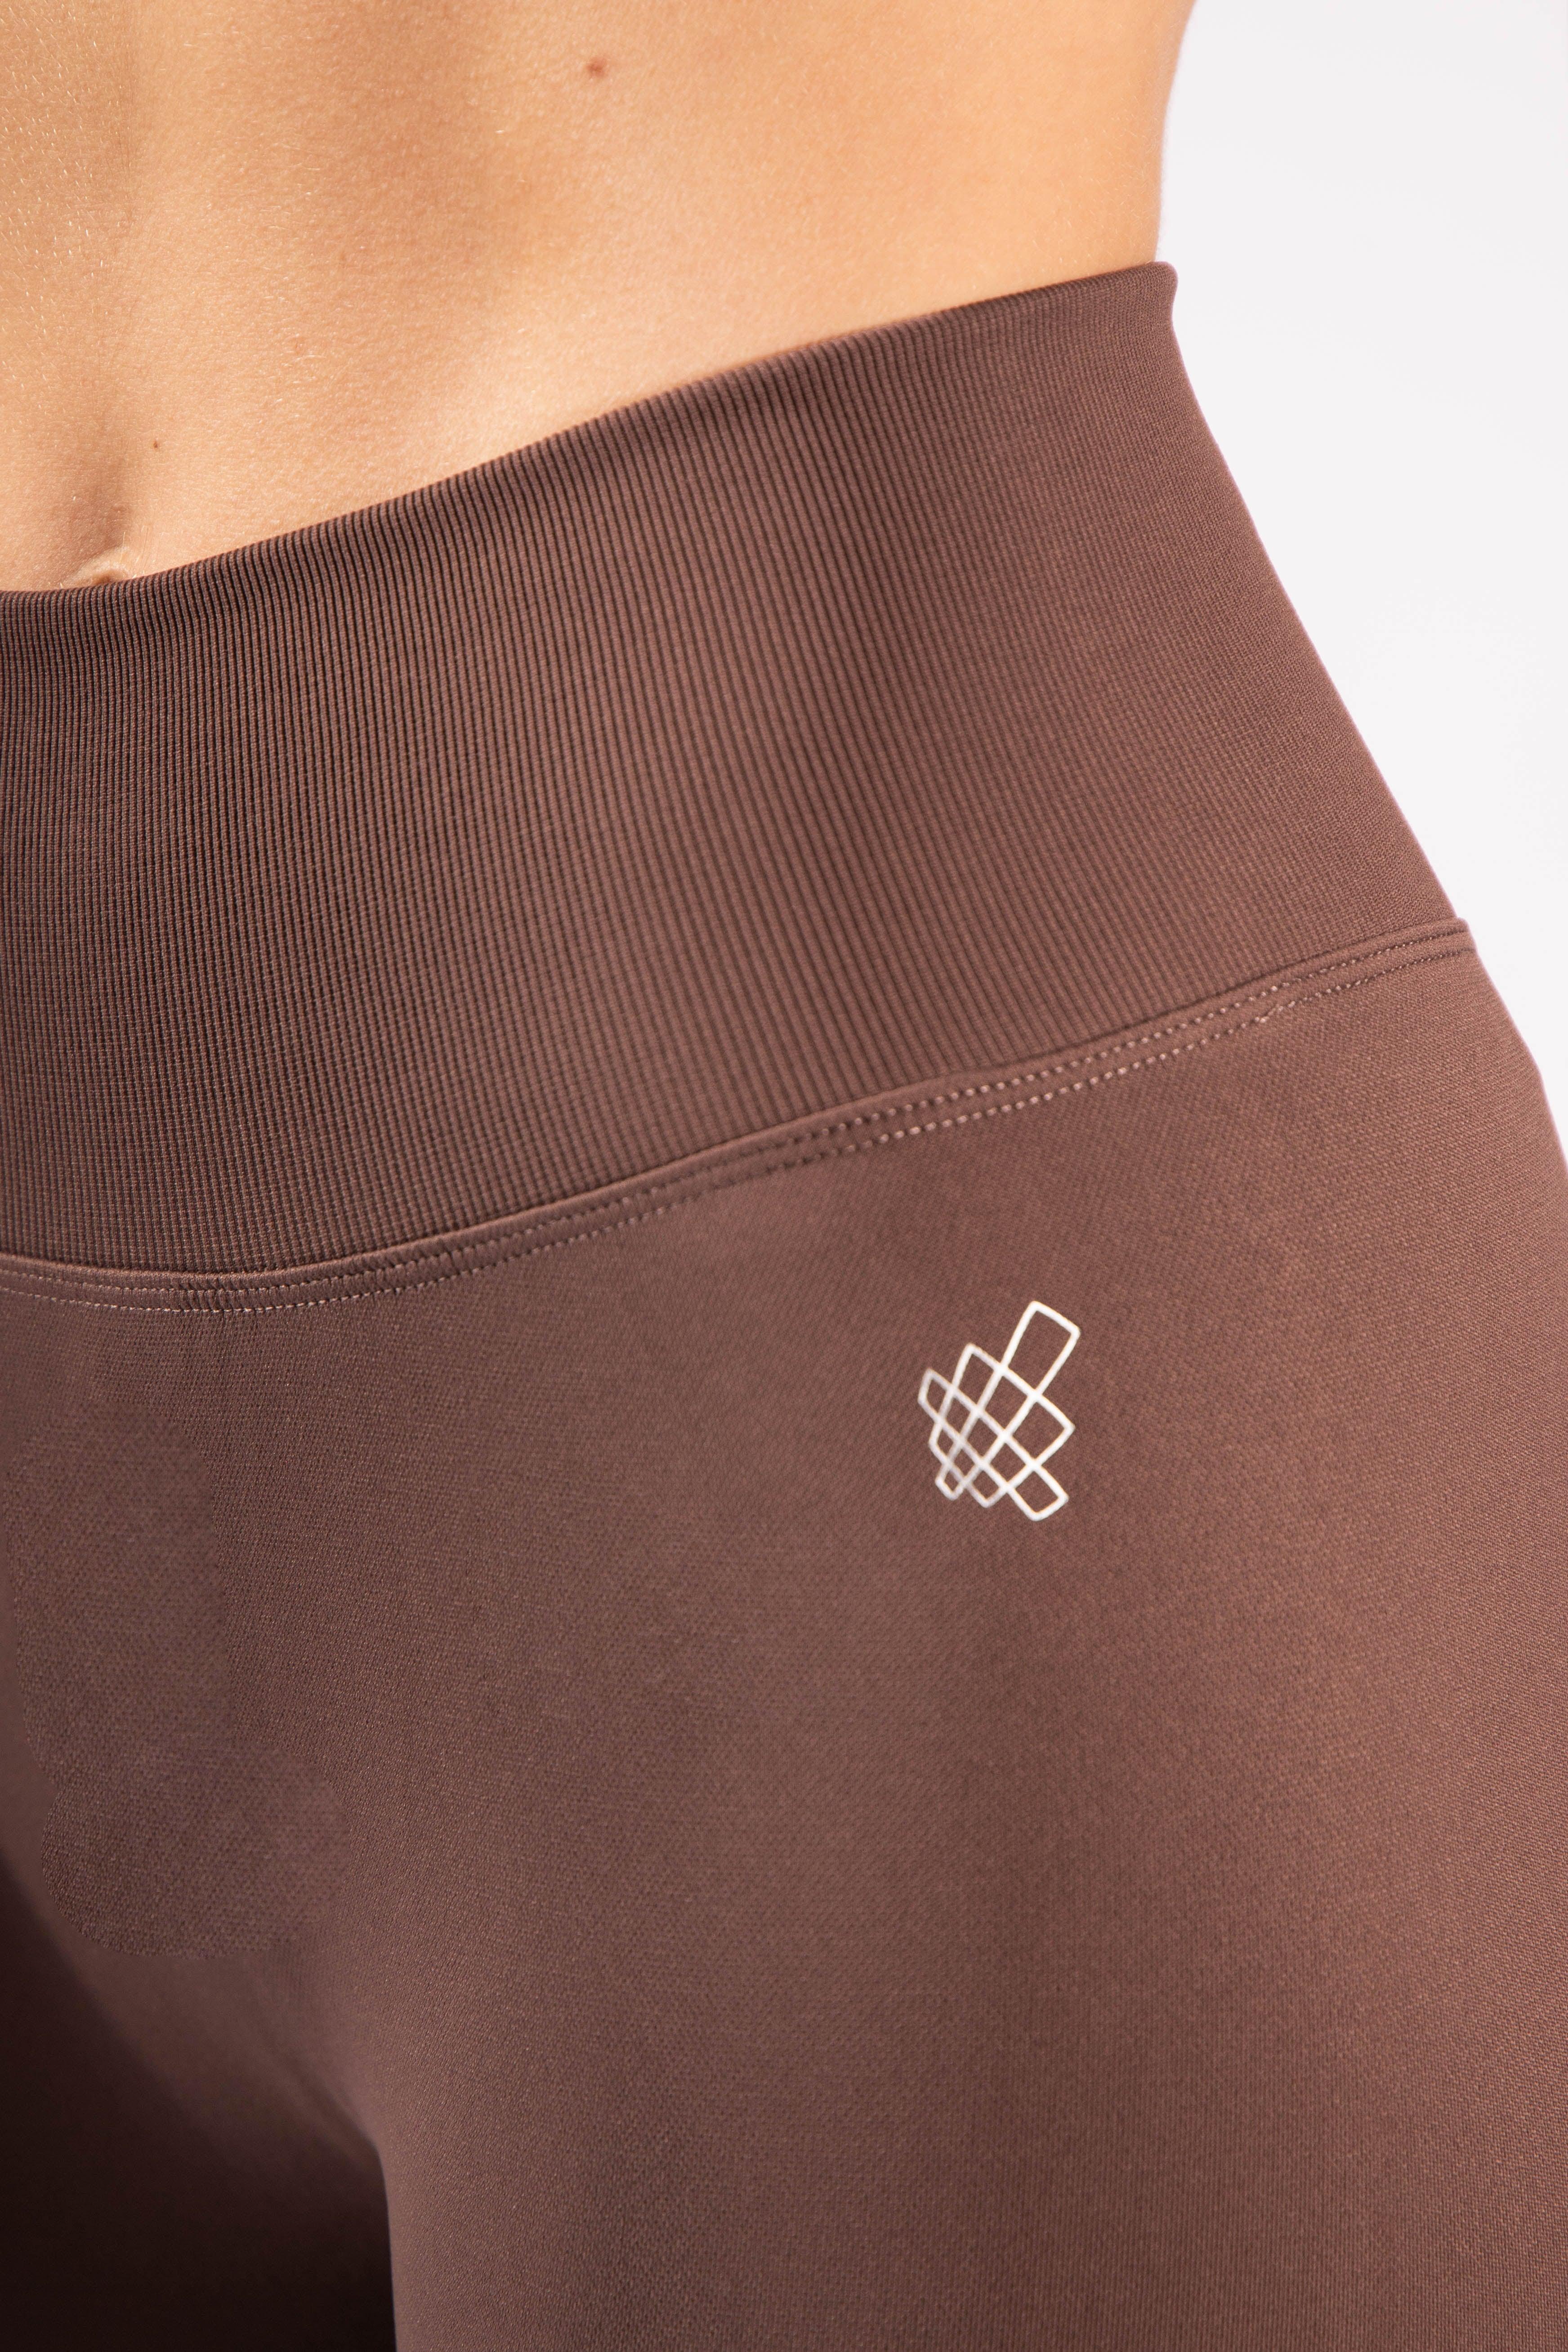 Active Seamless Workout Leggings - Brown